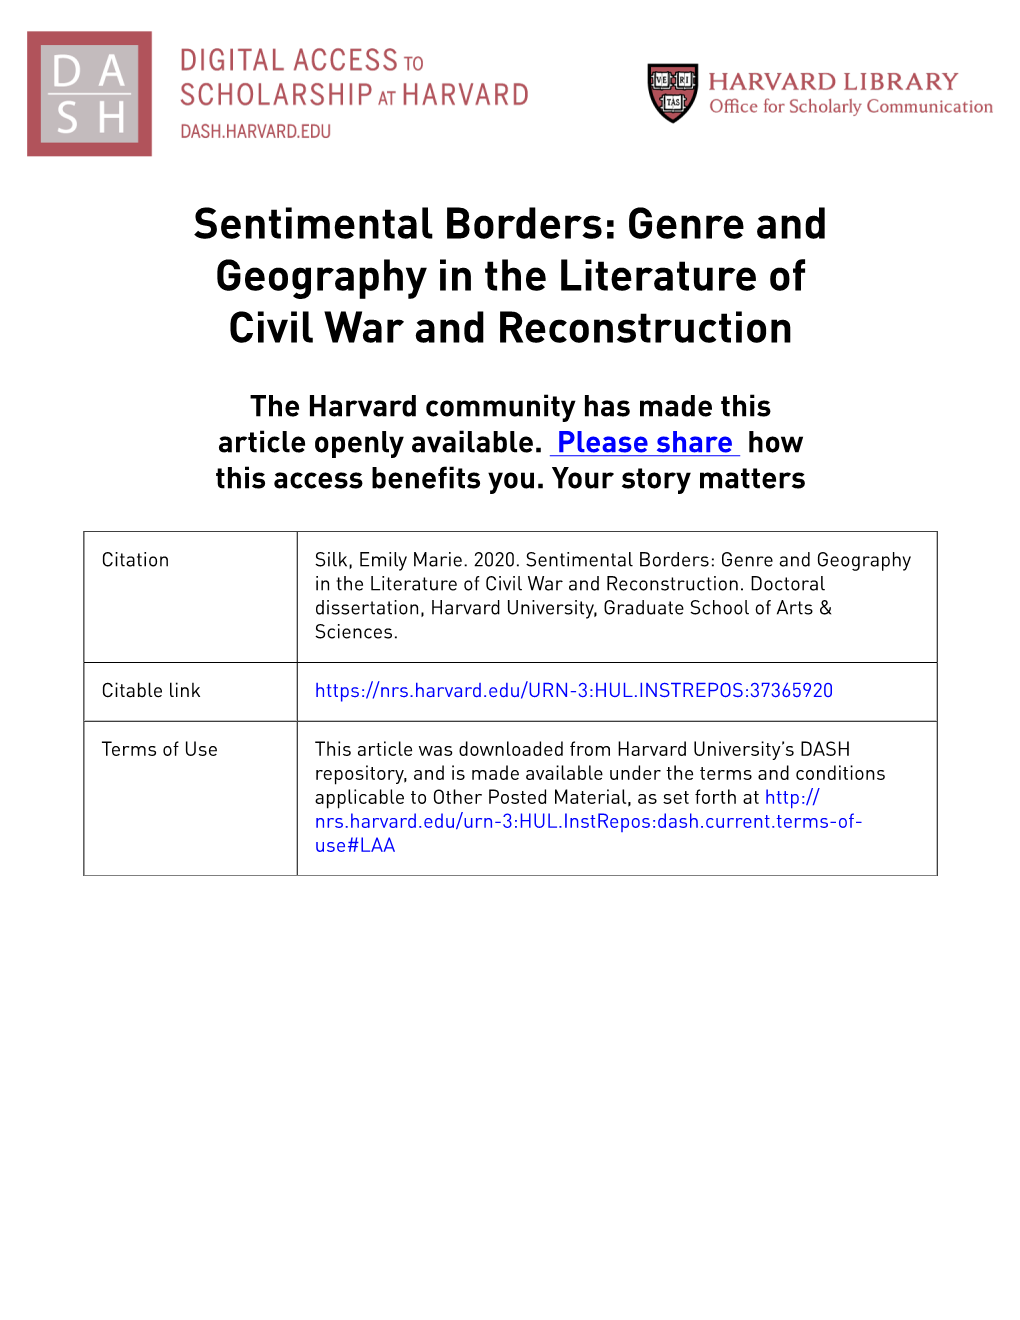 Genre and Geography in the Literature of Civil War and Reconstruction